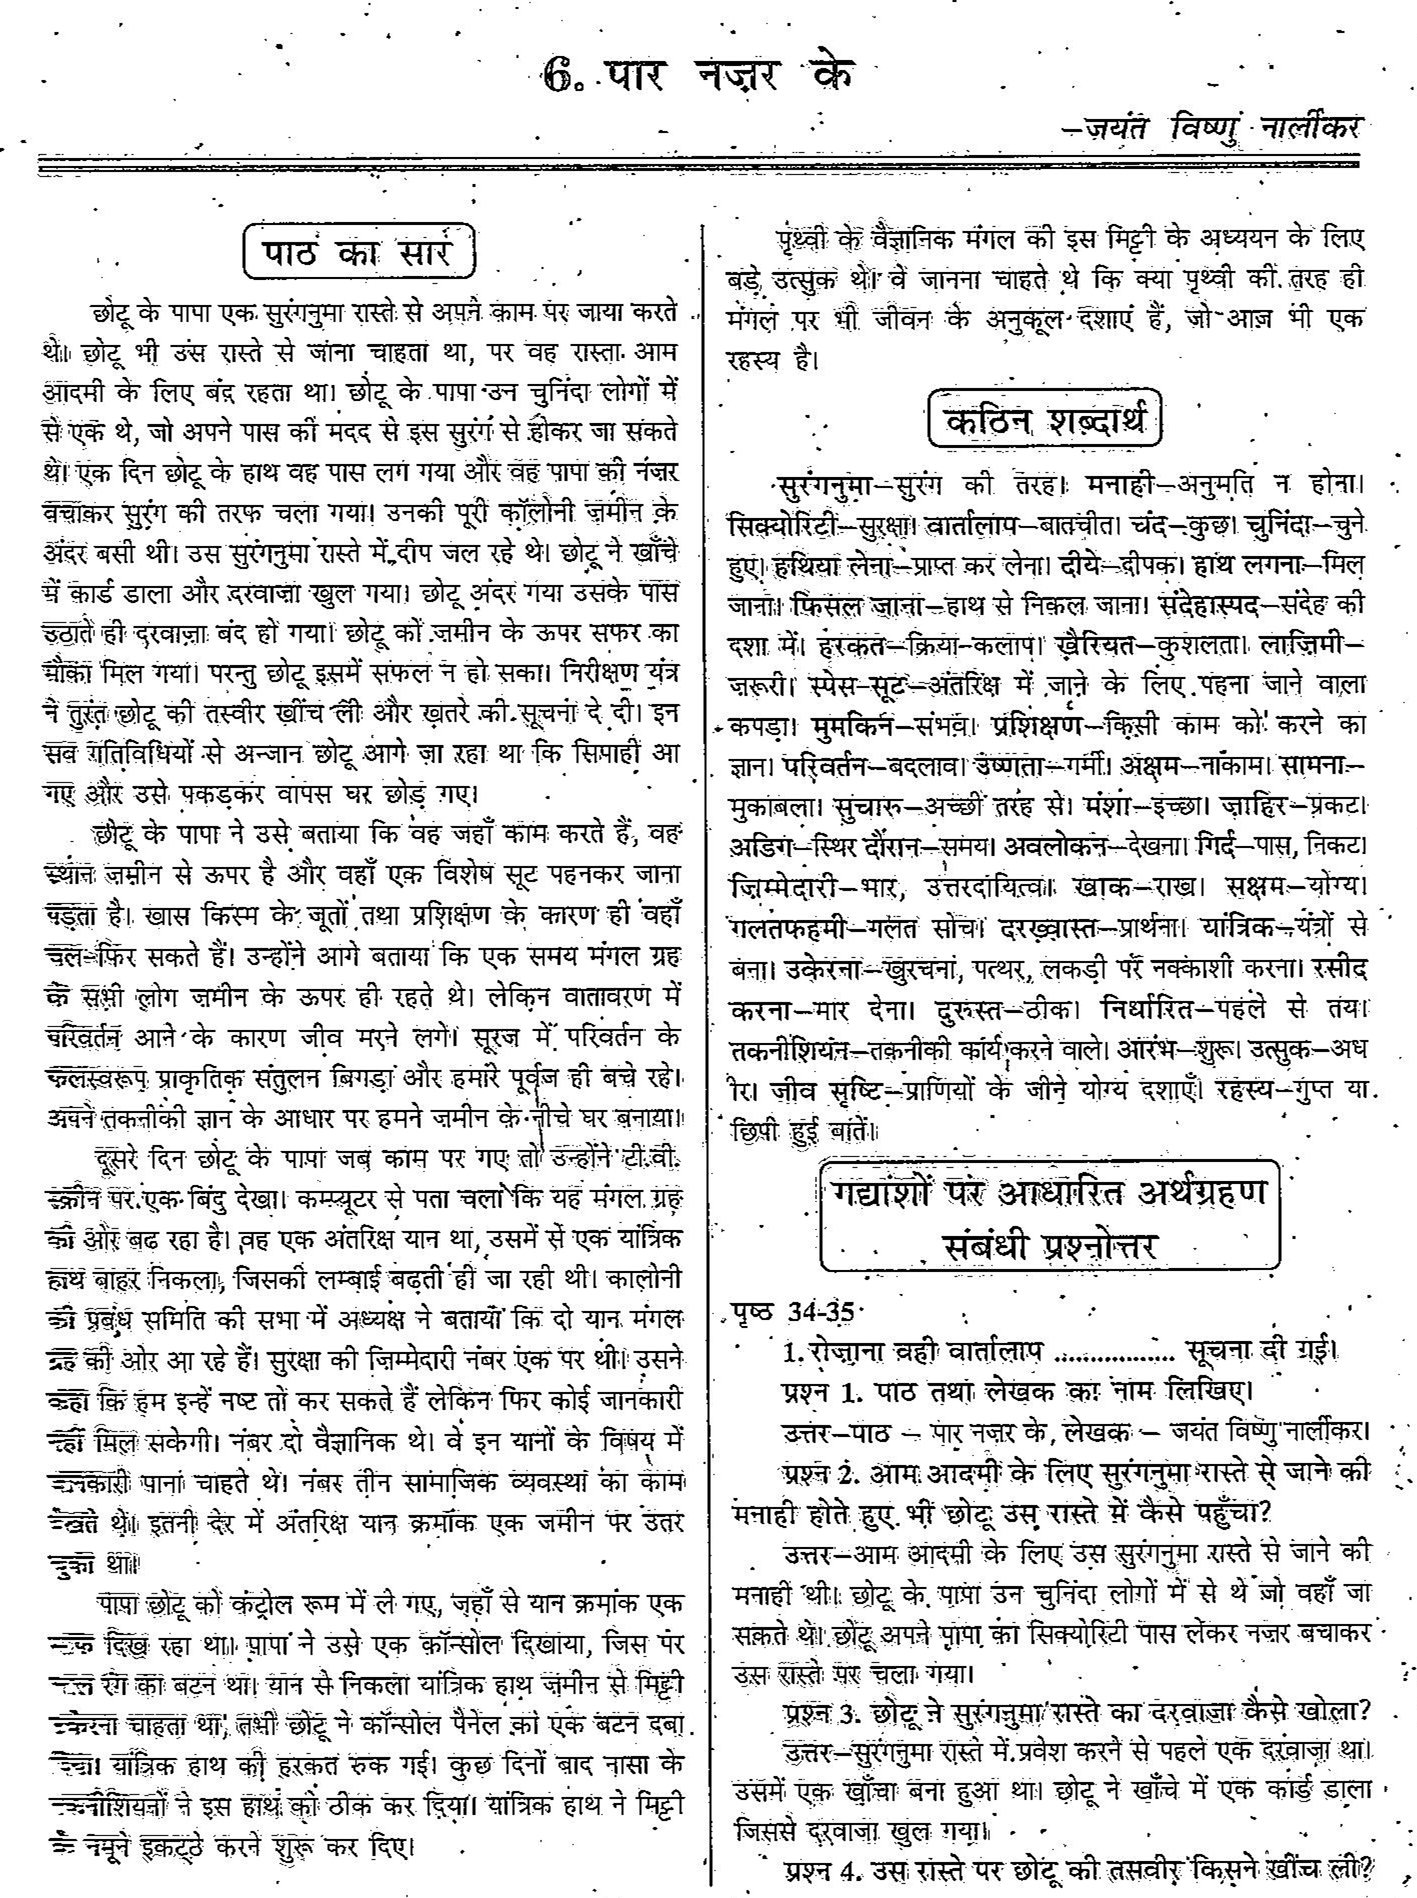 ncert-solutions-for-class-6-hindi-vasant-book-chapter-6